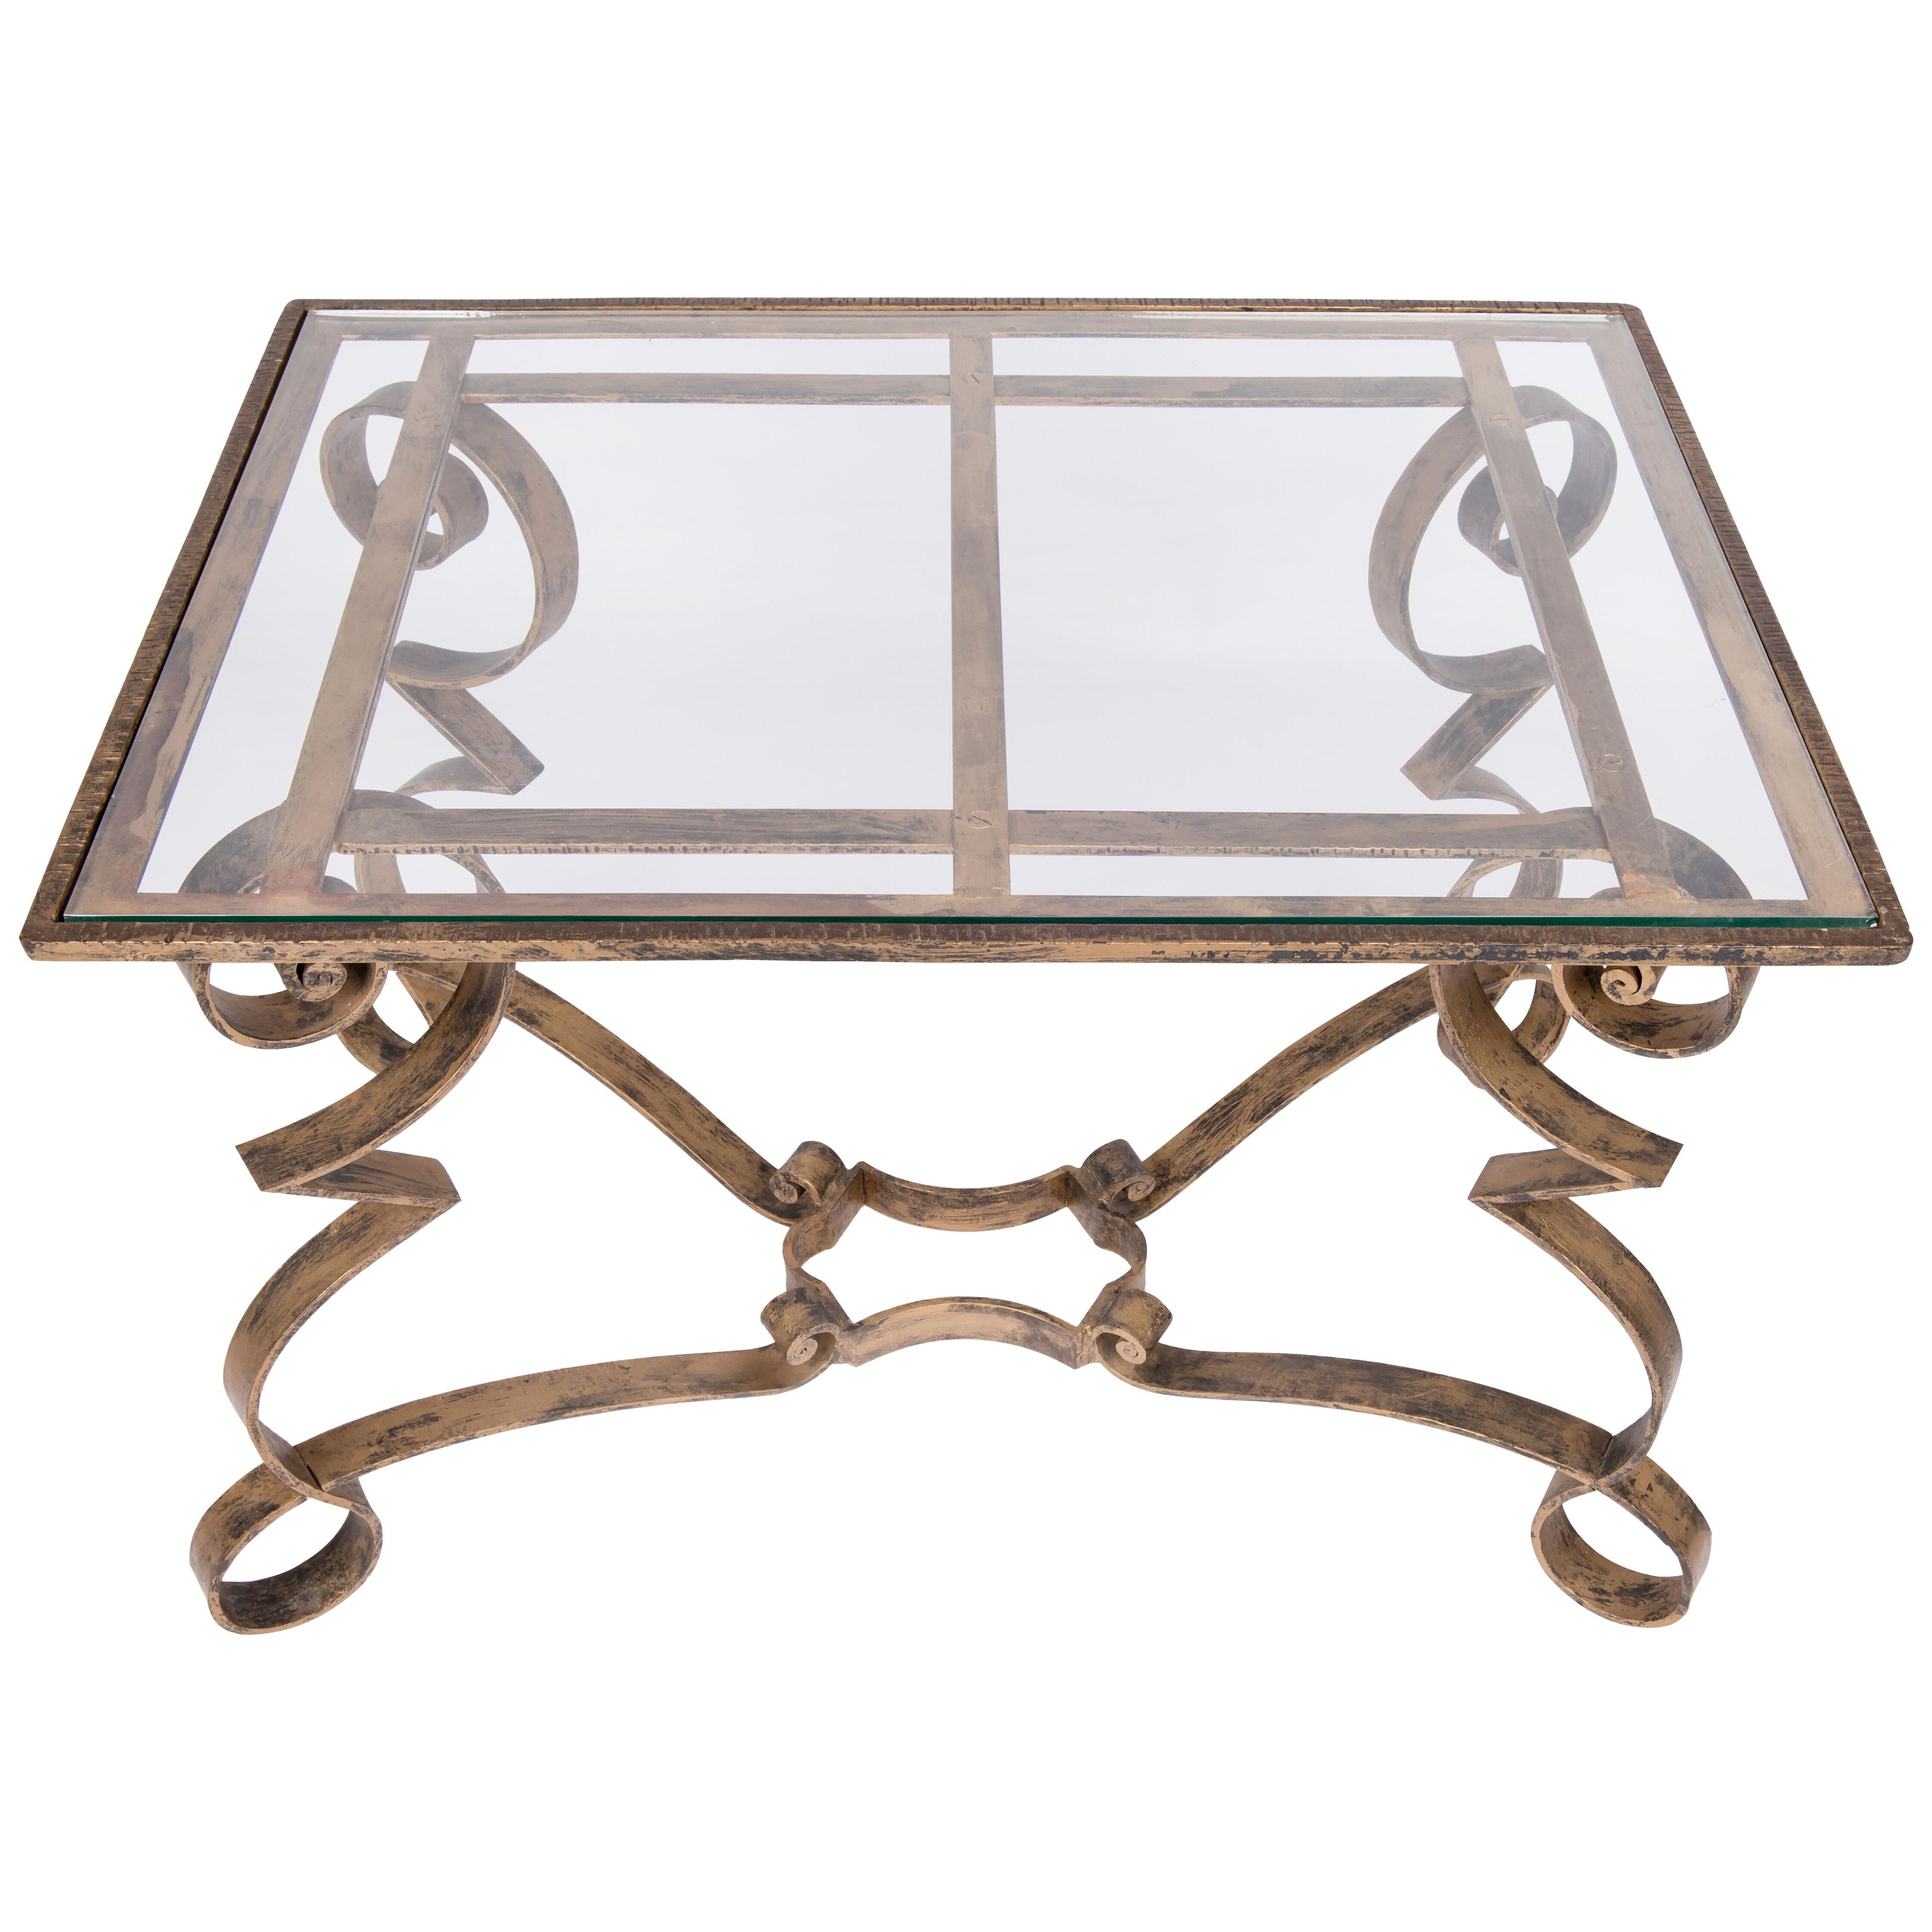 Gilded forged iron art-deco coffee table